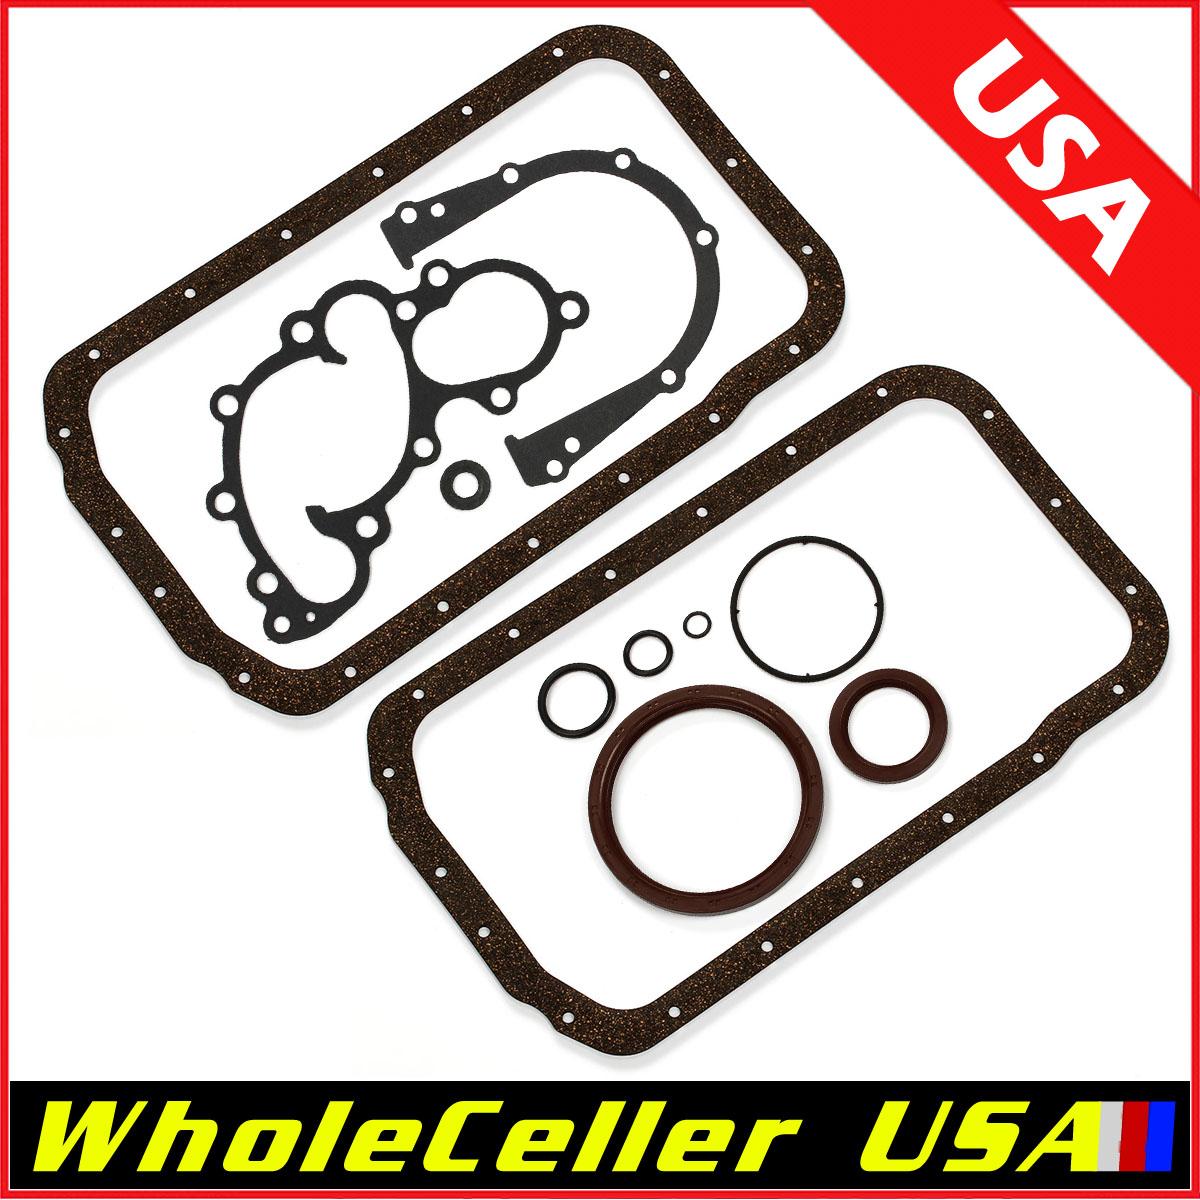 Oil Pan Cylinder Lower Gasket kit For Toyota 4Runner Tacoma Tundra T100